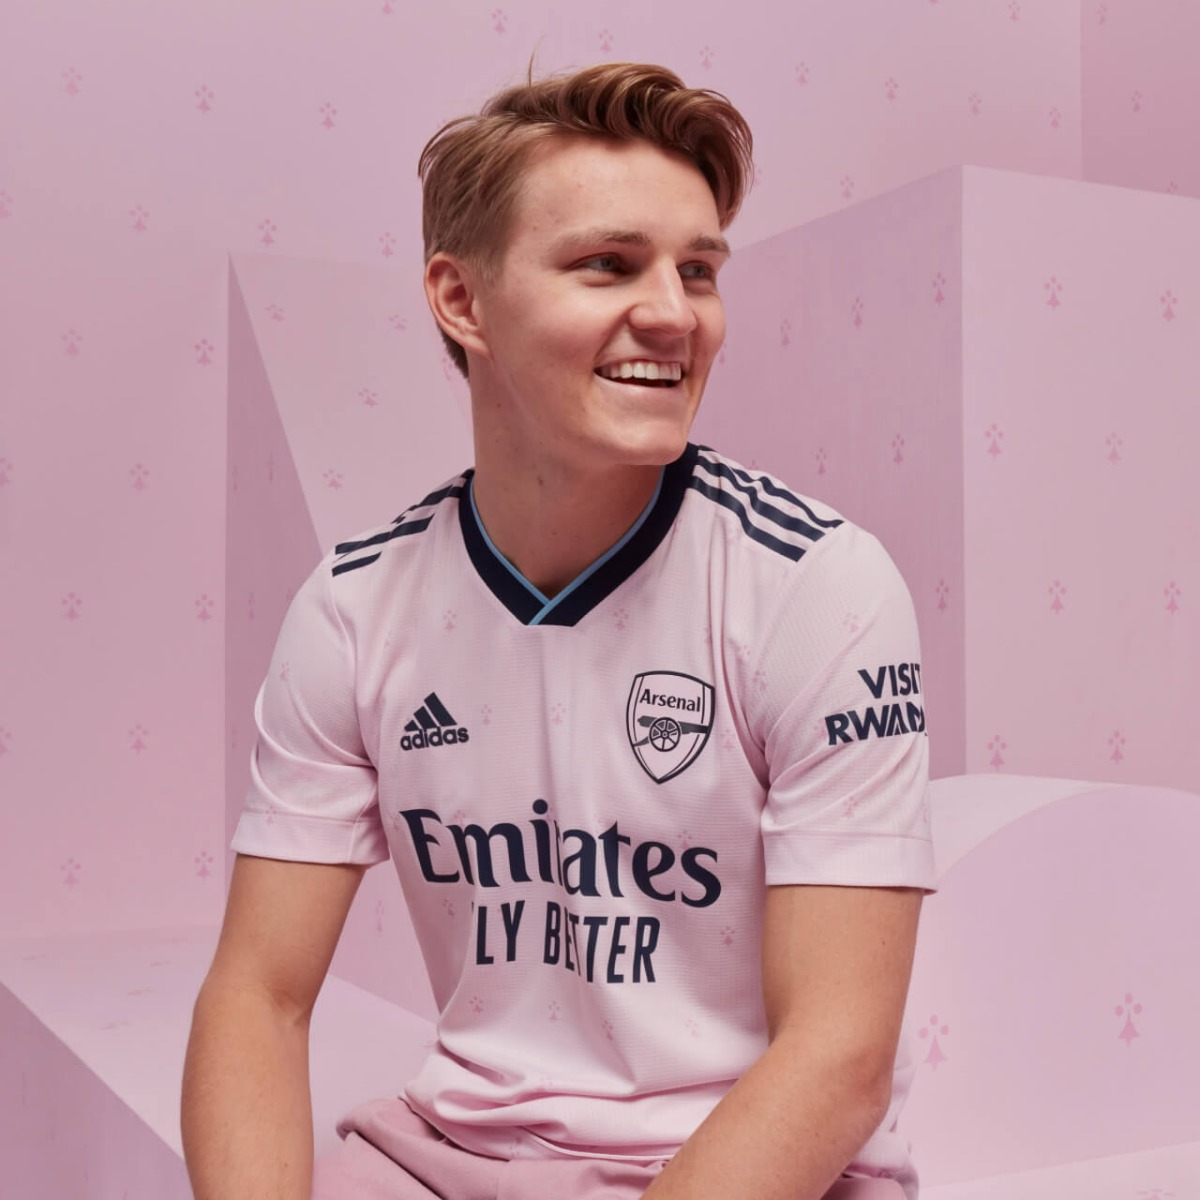 Maillot Real Madrid : hommage aux supporters sur la tenue away